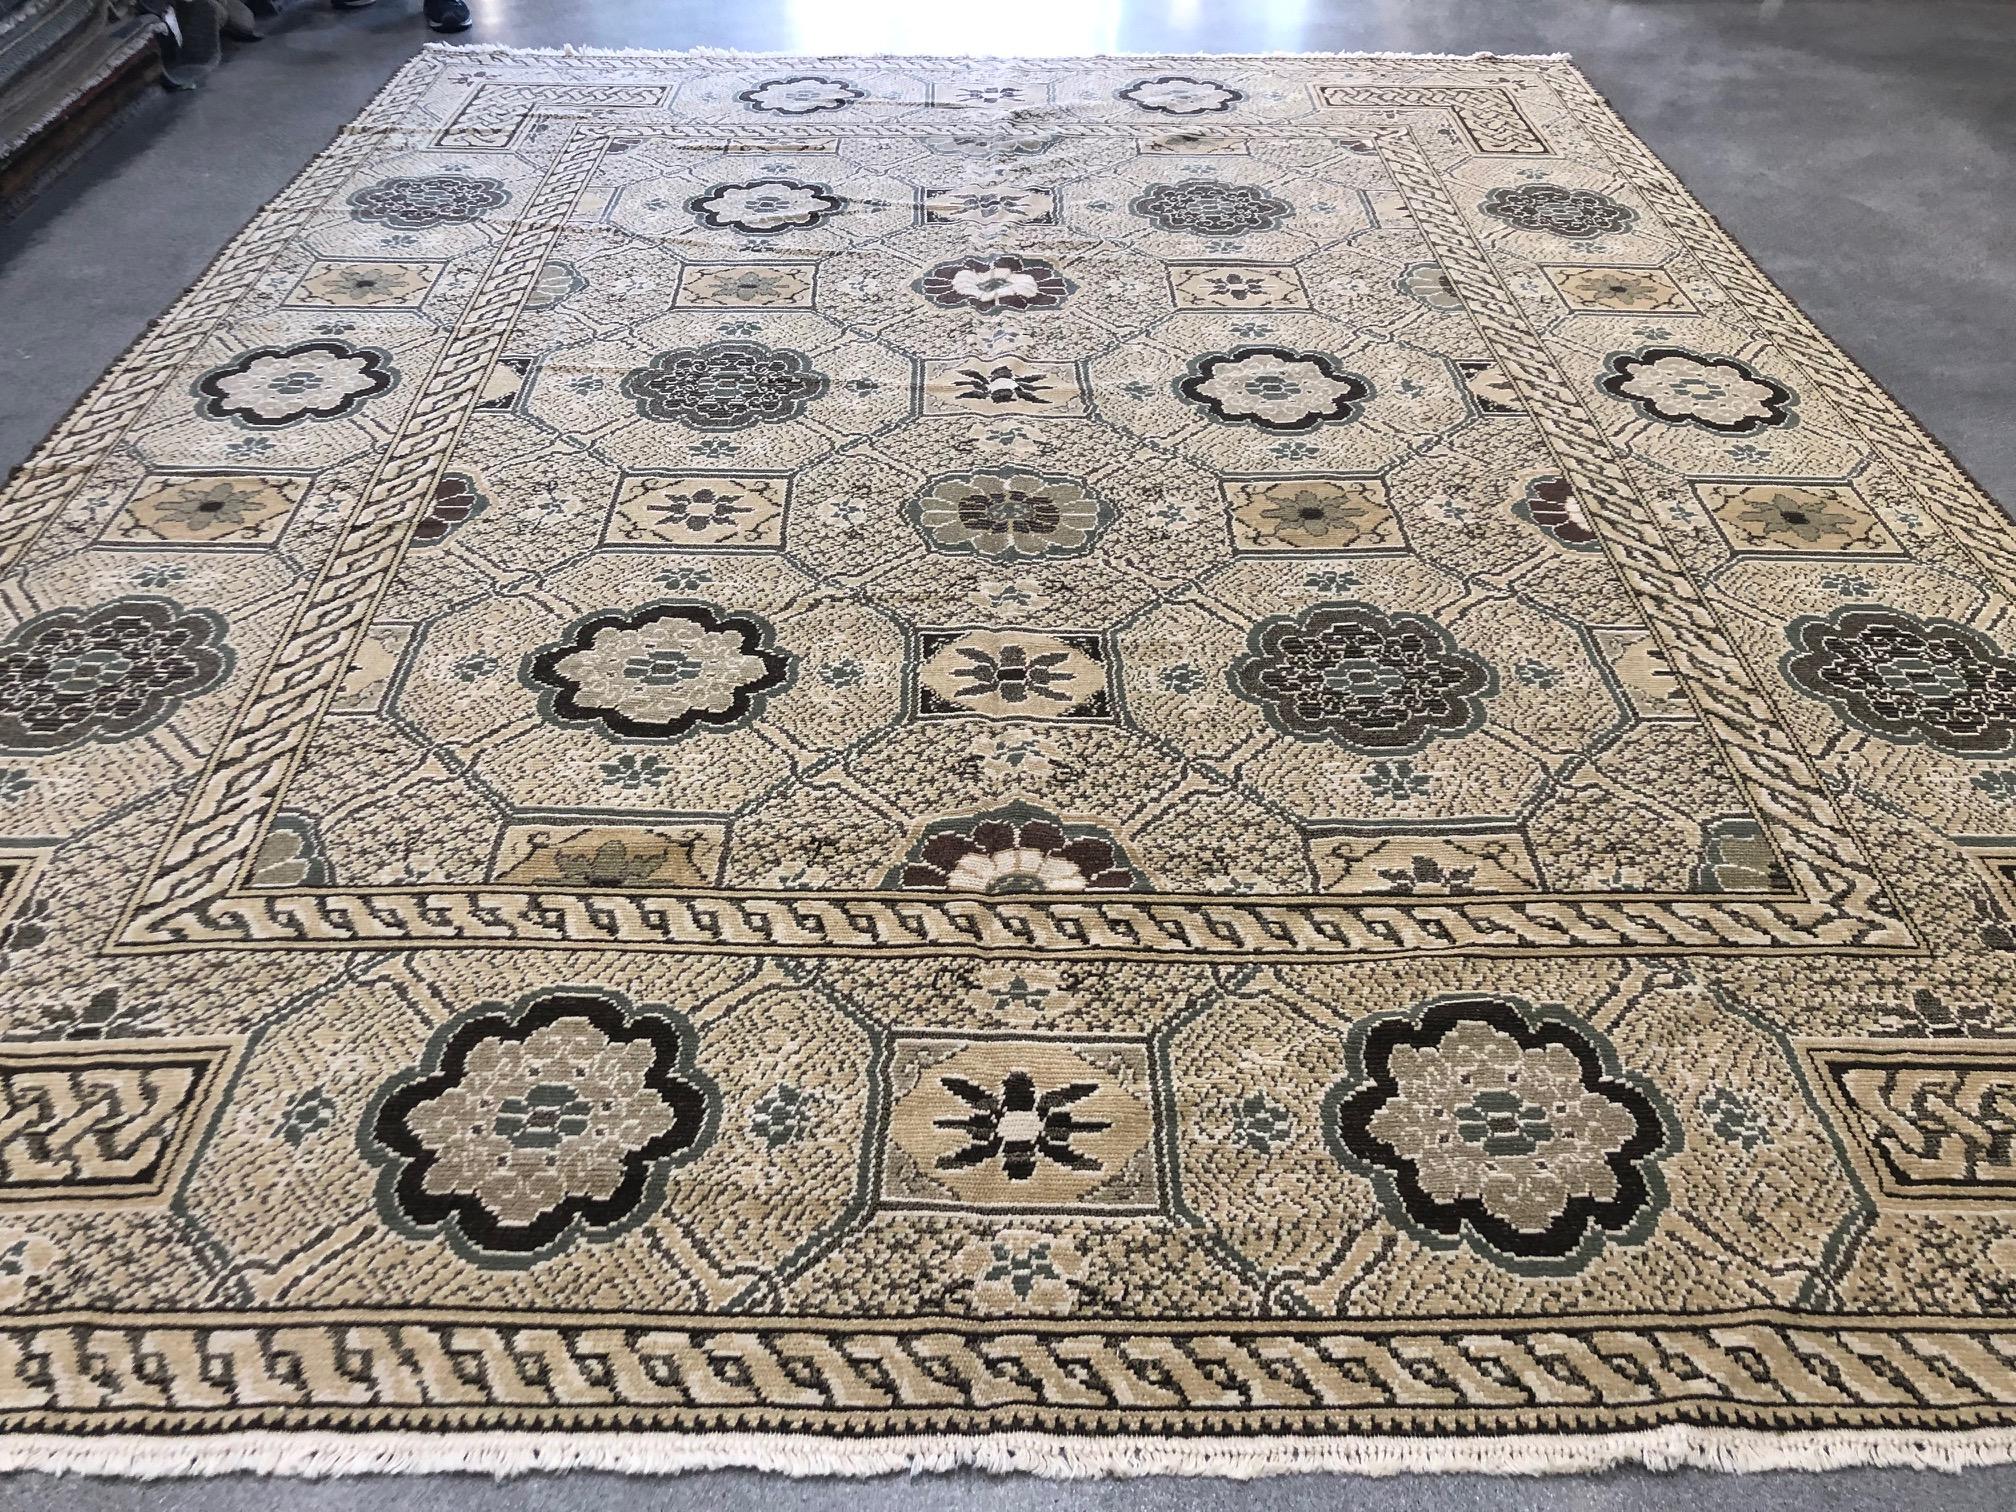 Capture feel of ancient times with this spectacular area rug that brings together stylized floral and geometric motifs to create the look of an inlaid stone floor in comfortable and durable wool. Braided frames around the center panel and outside